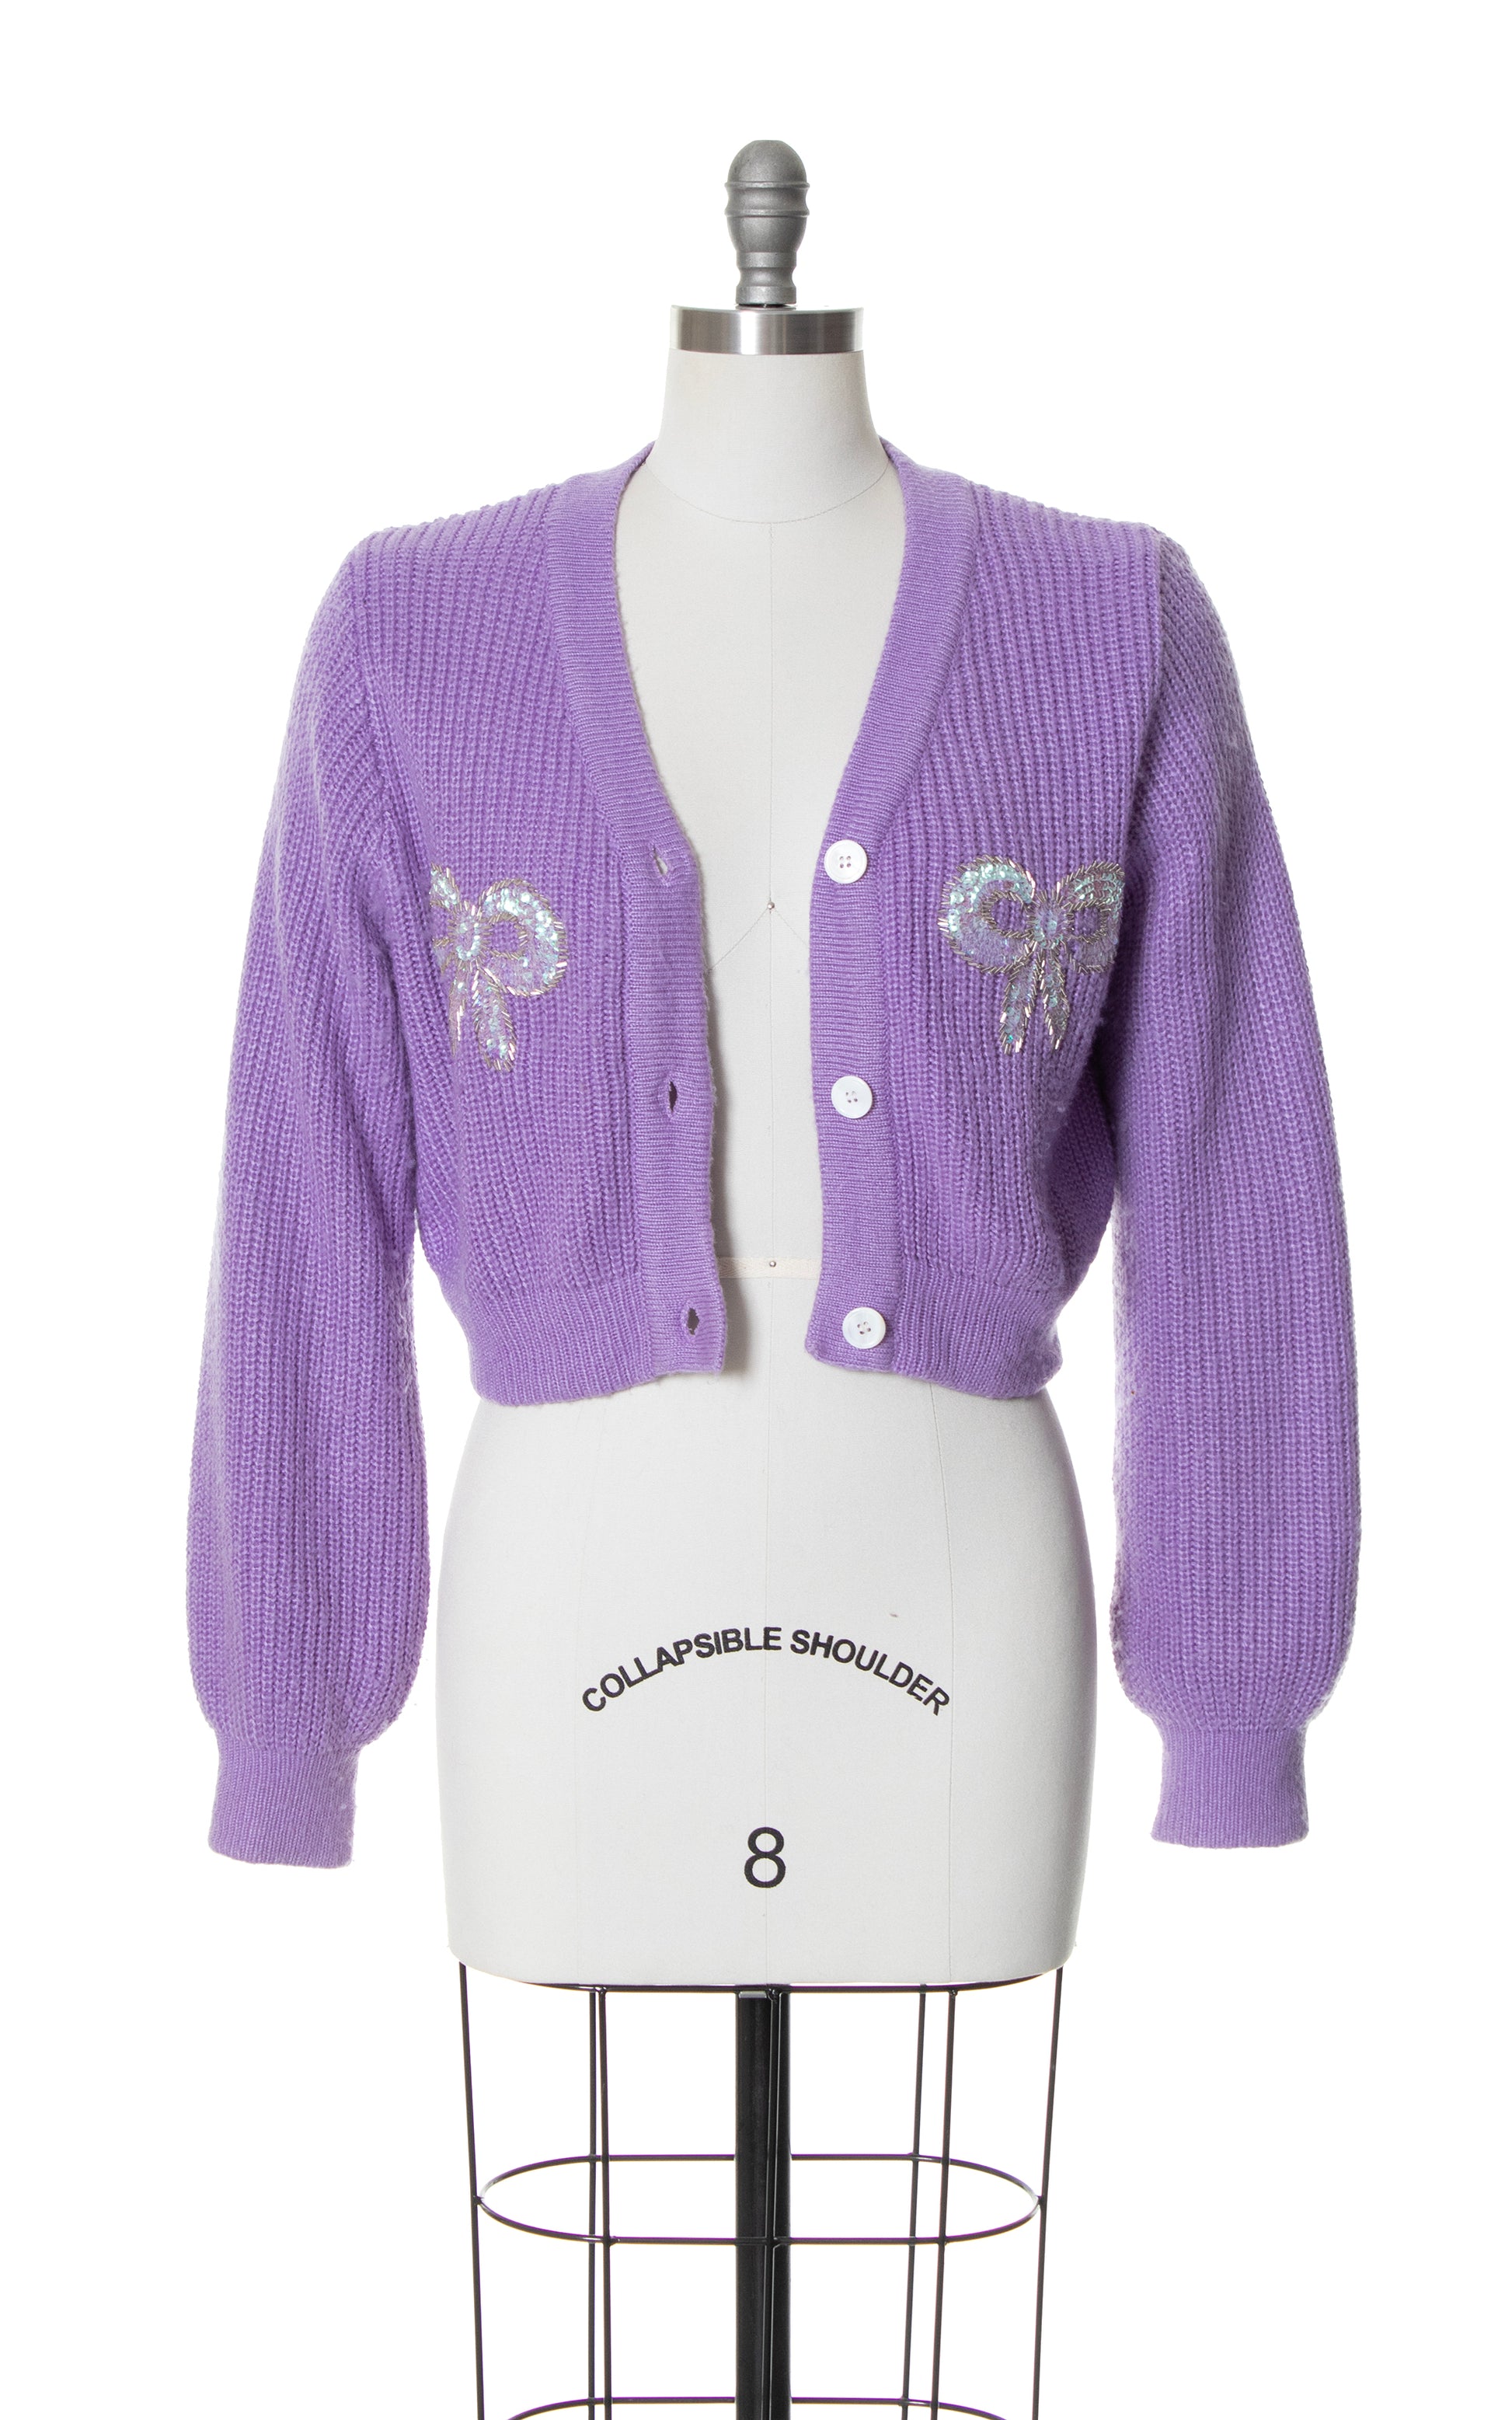 Vintage 50s 1950s Bow Sequined Cropped Cardigan Knit Purple Acrylic Sweater BirthdayLifeVintage